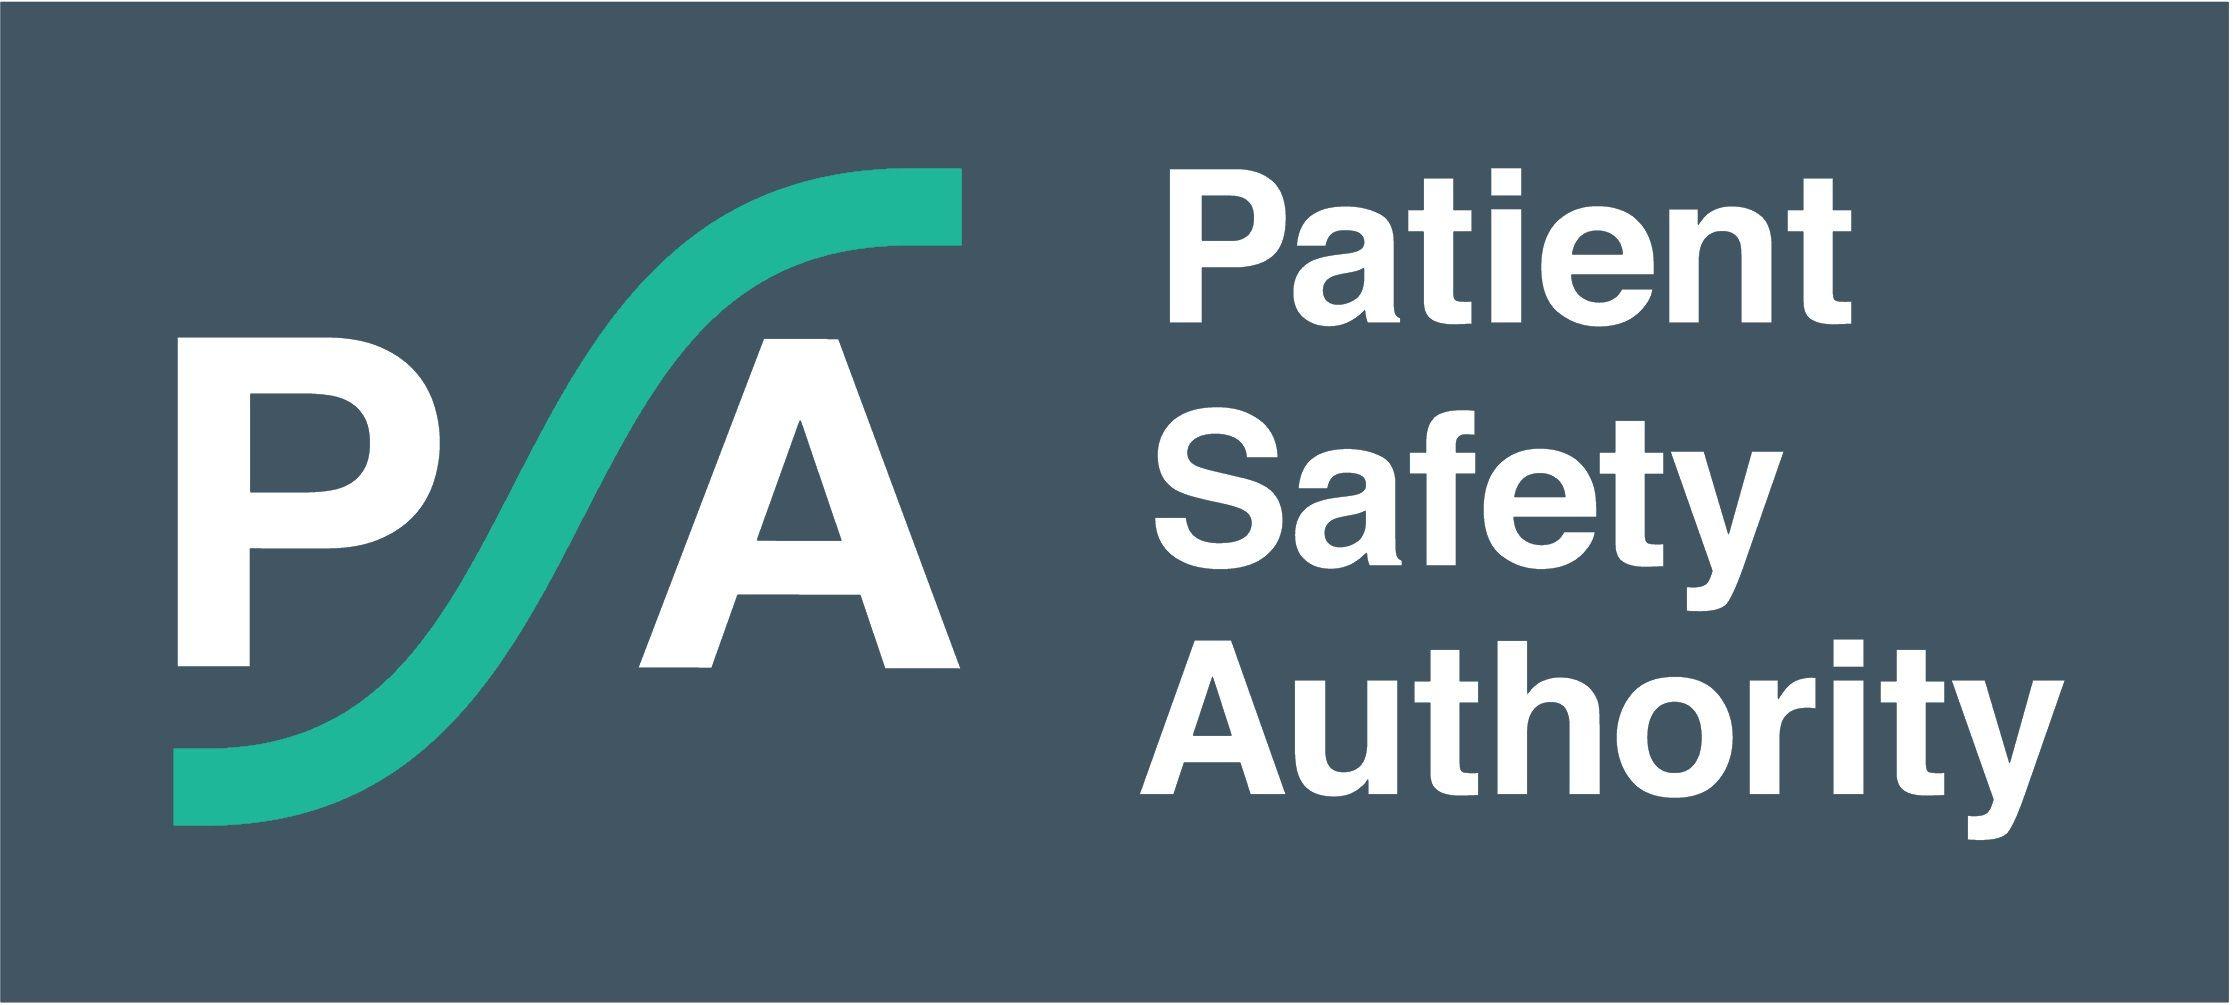 Patient Safety Logo - Patient Safety Authority - Safe healthcare for all patients